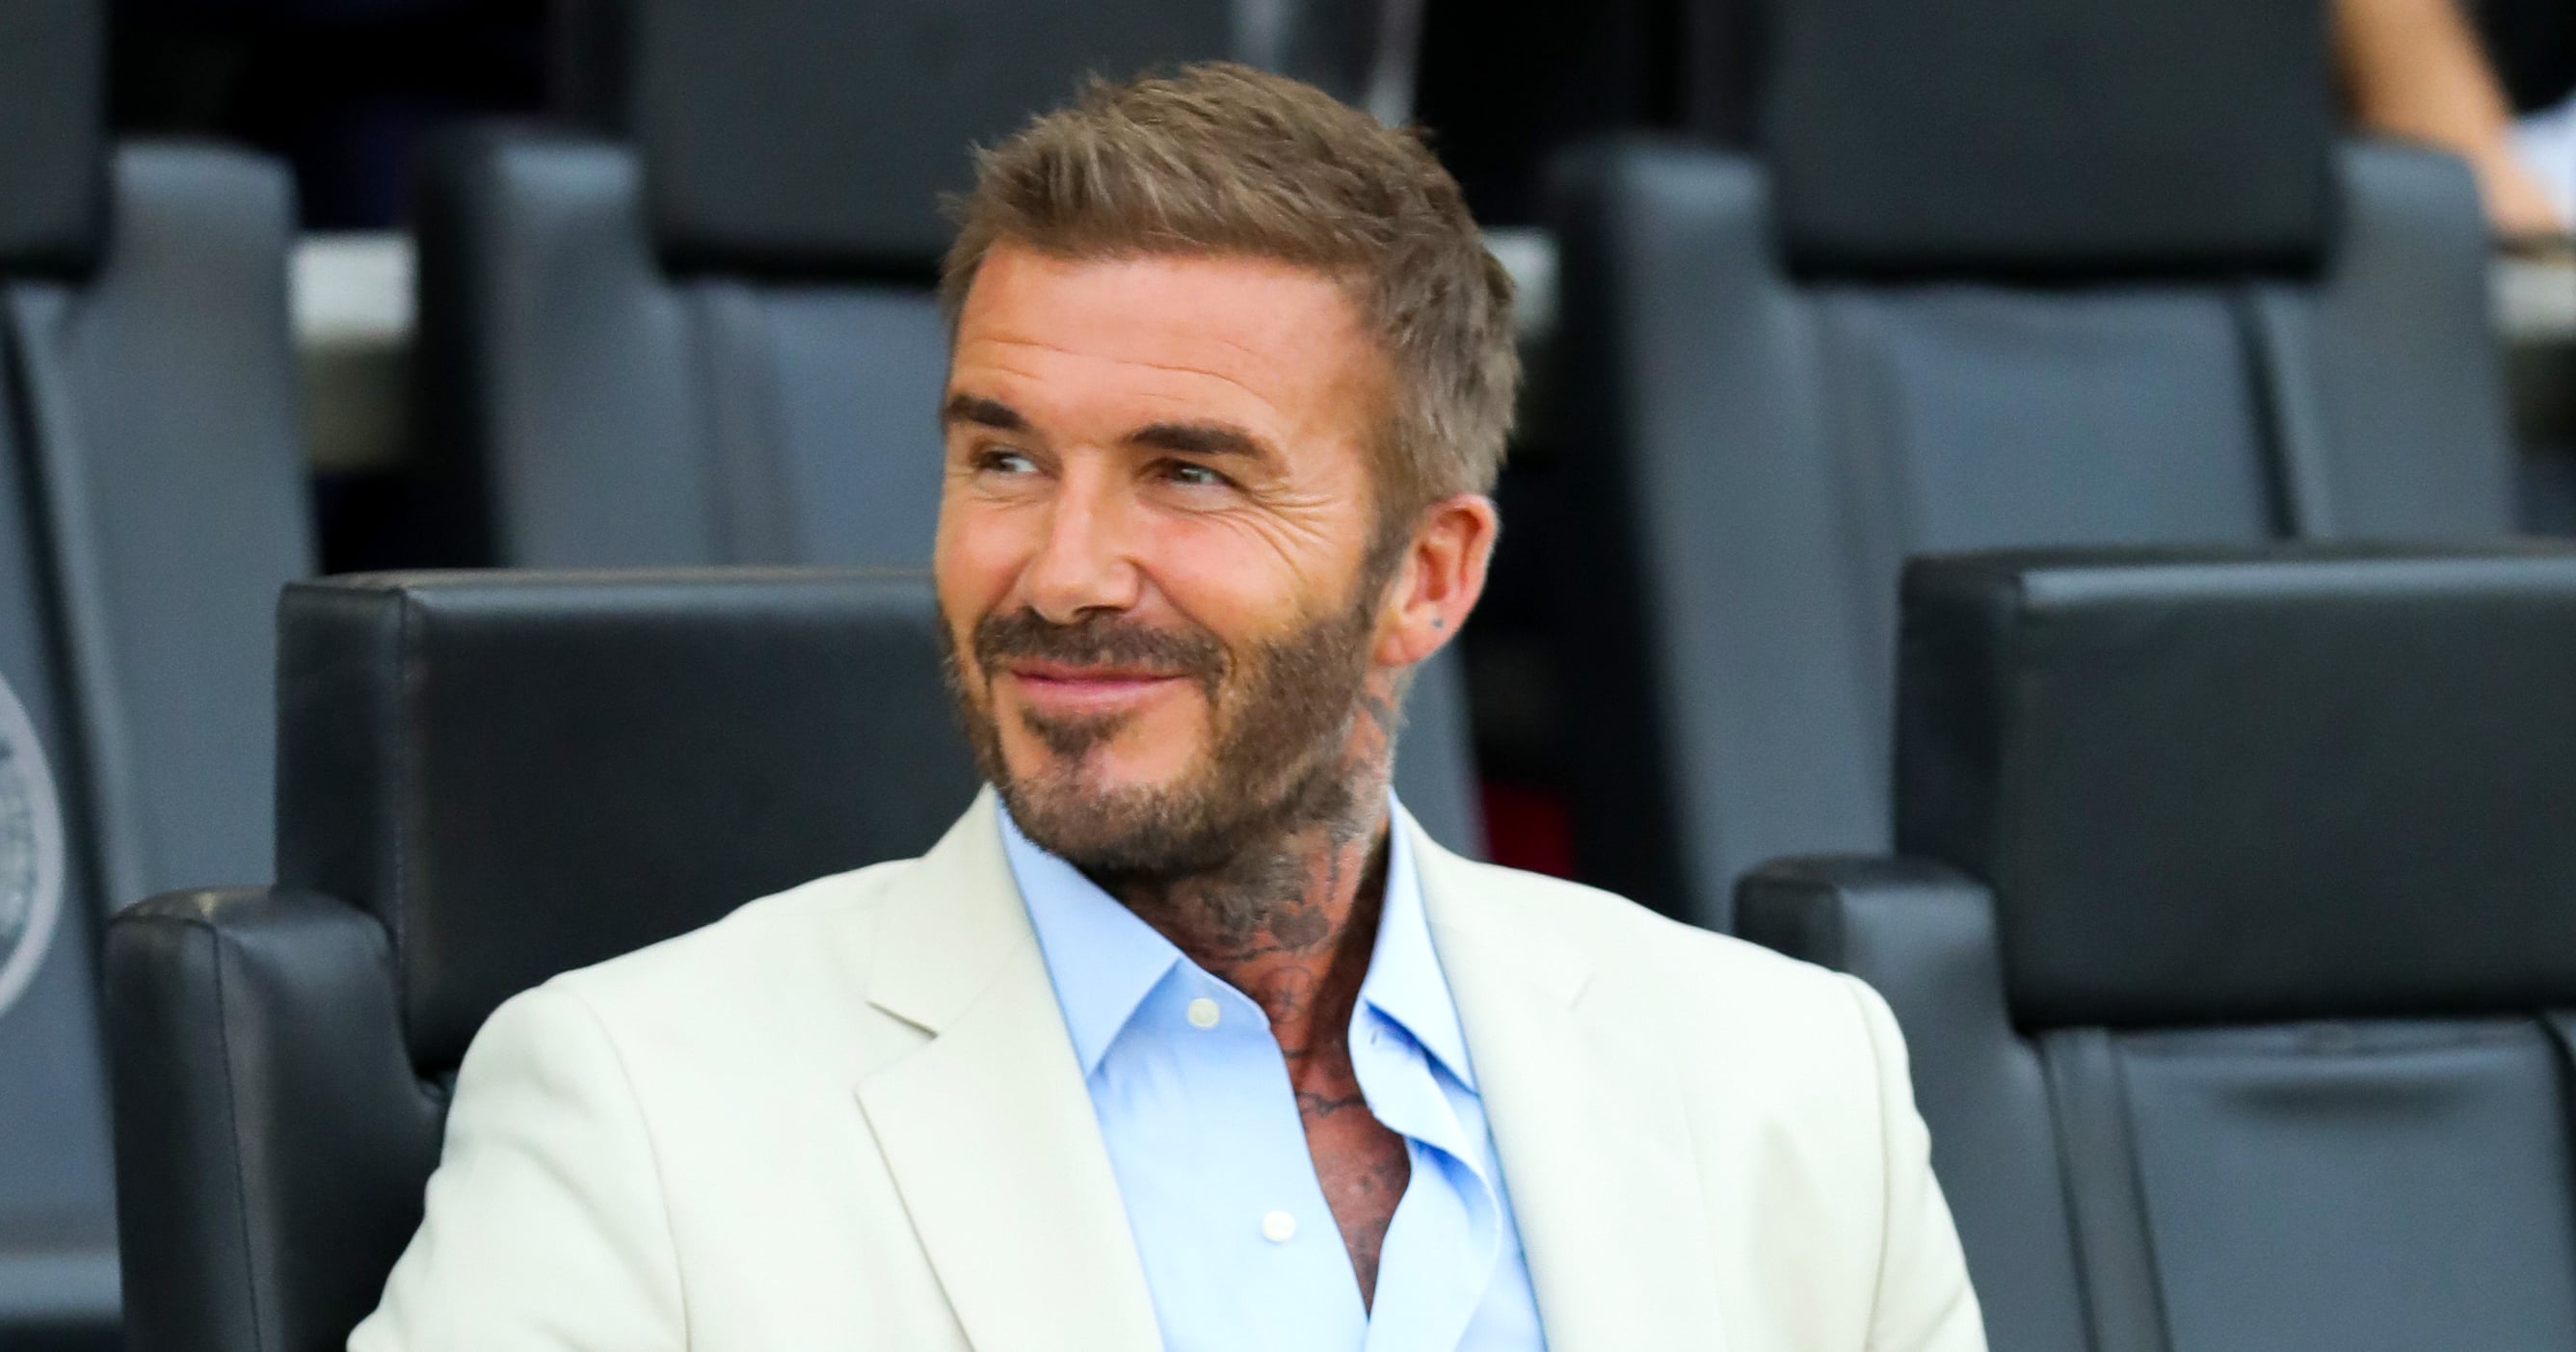 David Beckham’s New Hair Transformation Is a 2000s Throwback